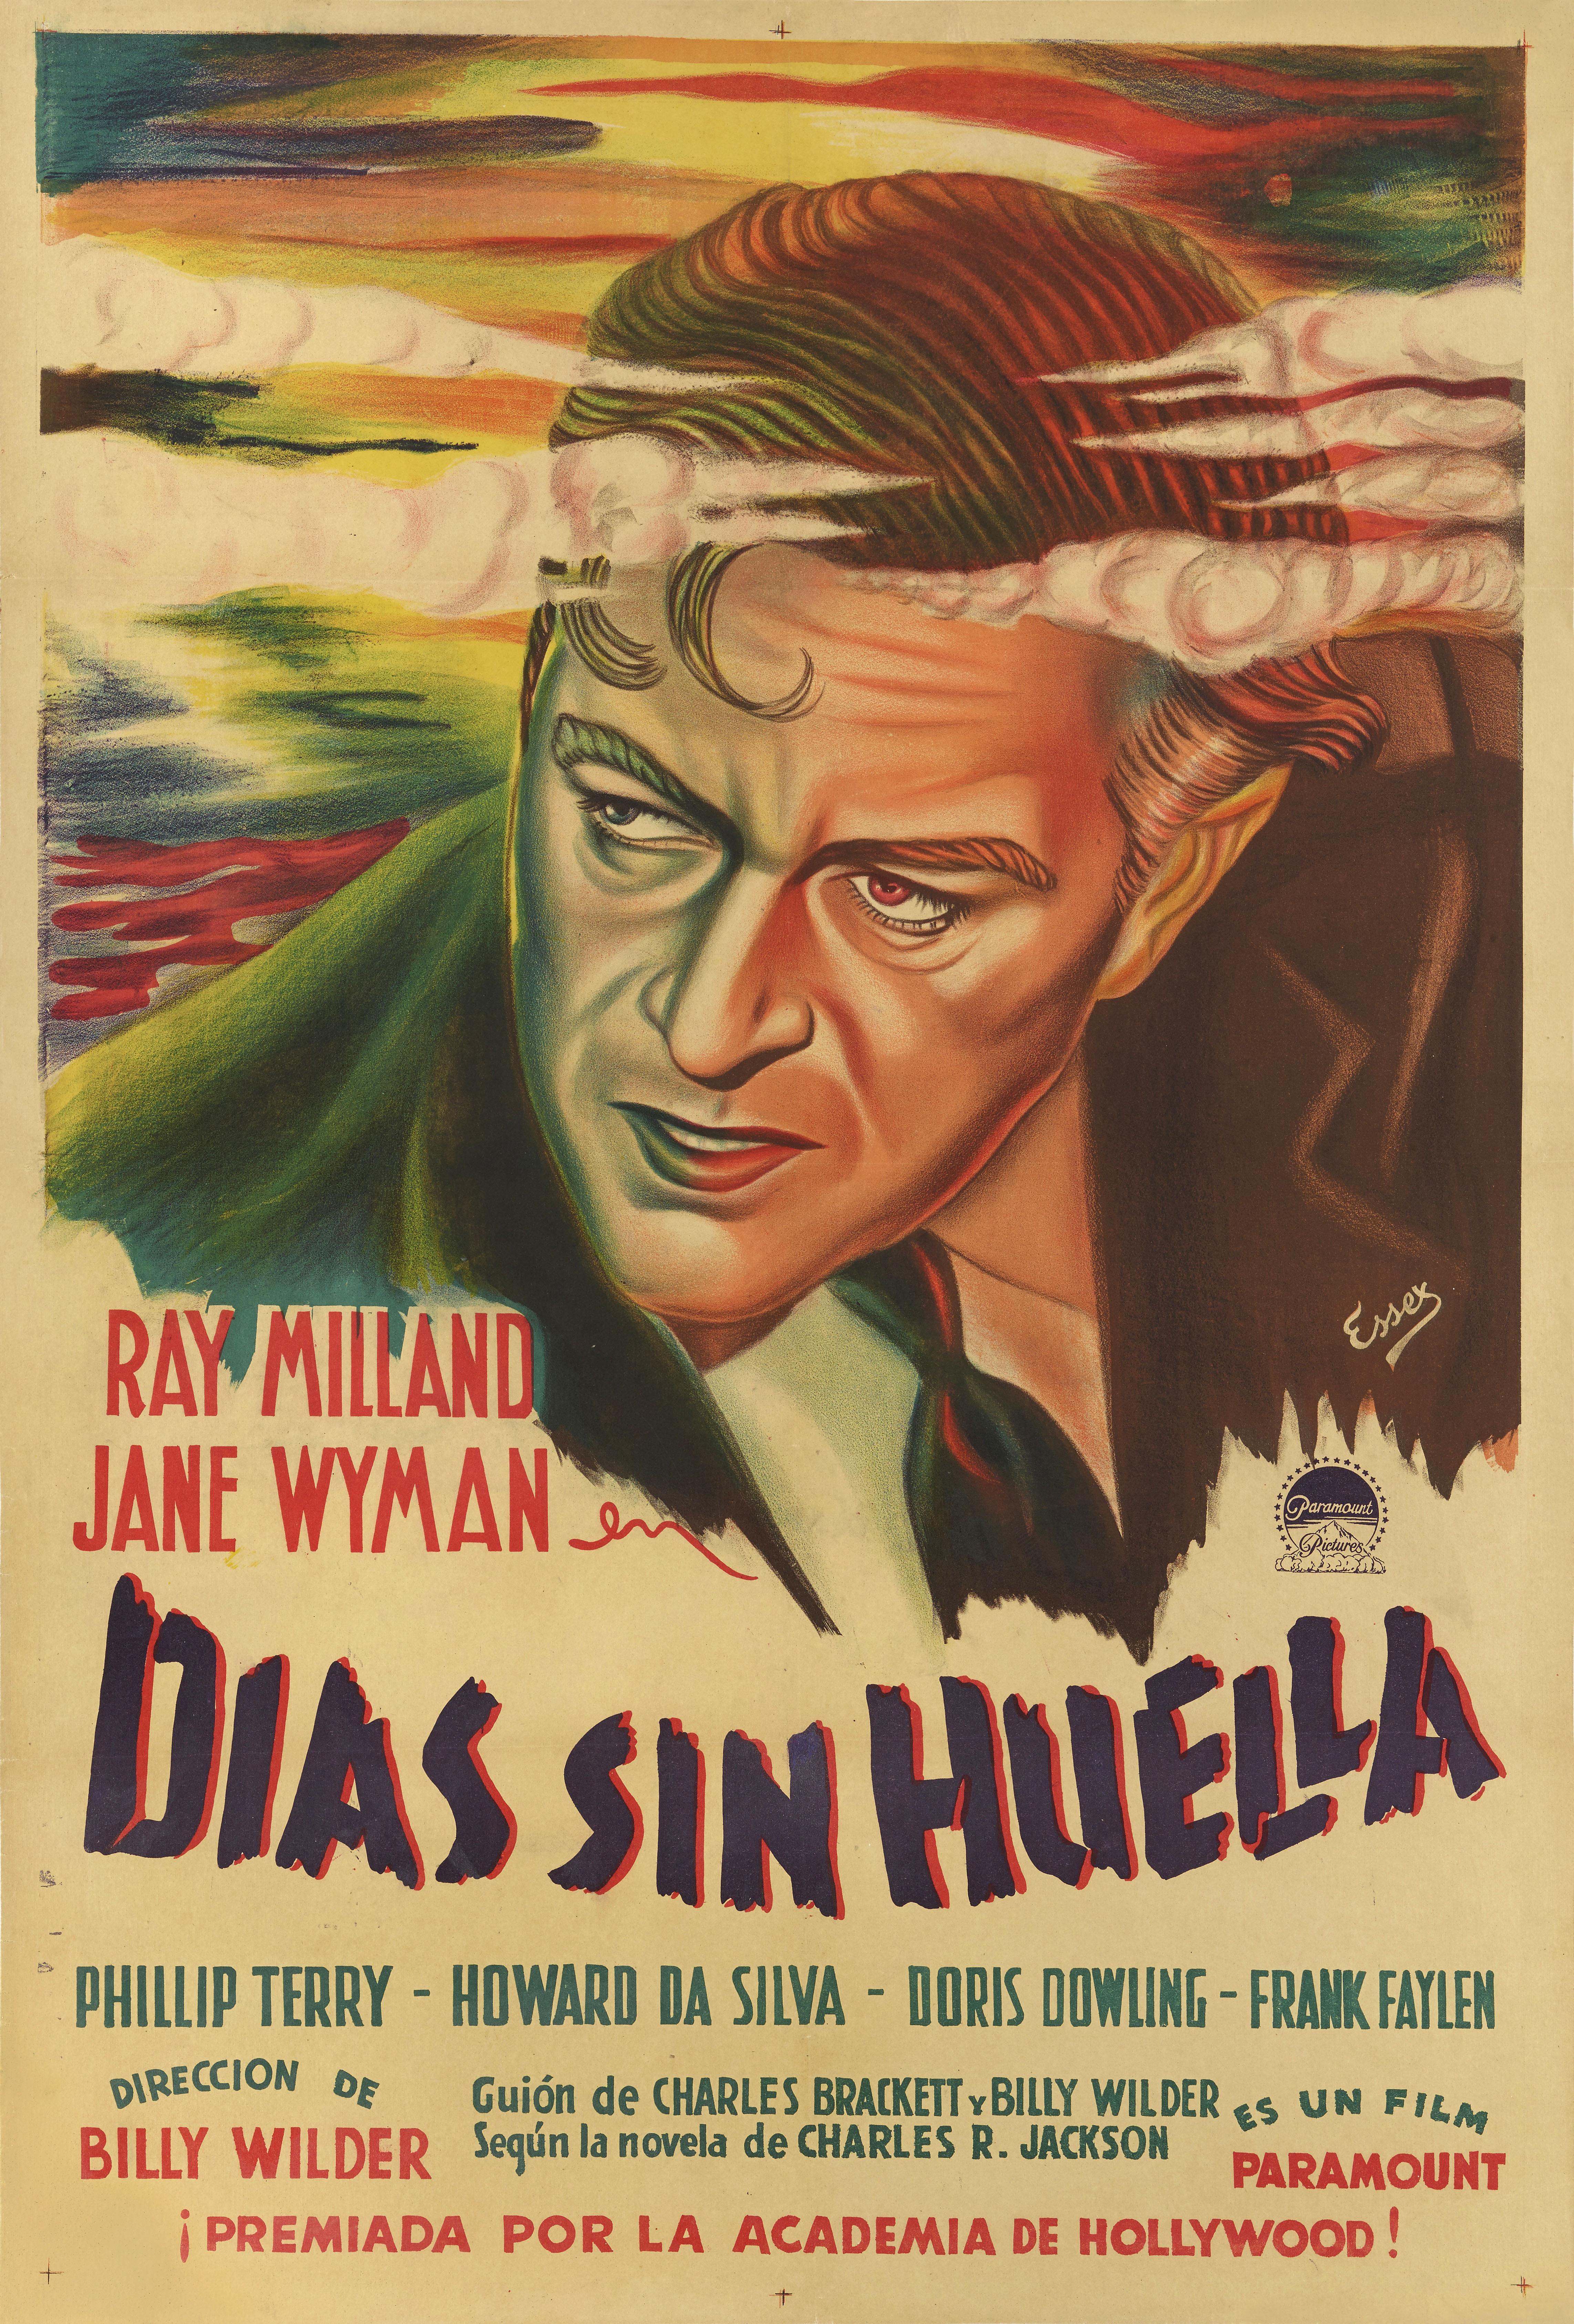 Original Argentine film poster for the 1945 Drama / Film Noir The Lost Weekend.
This film was directed by Billy Wilder and starred Ray Milland, Jane Wyman and Phillip Terry.
this poster is in excellent condition, with the colours remaining very